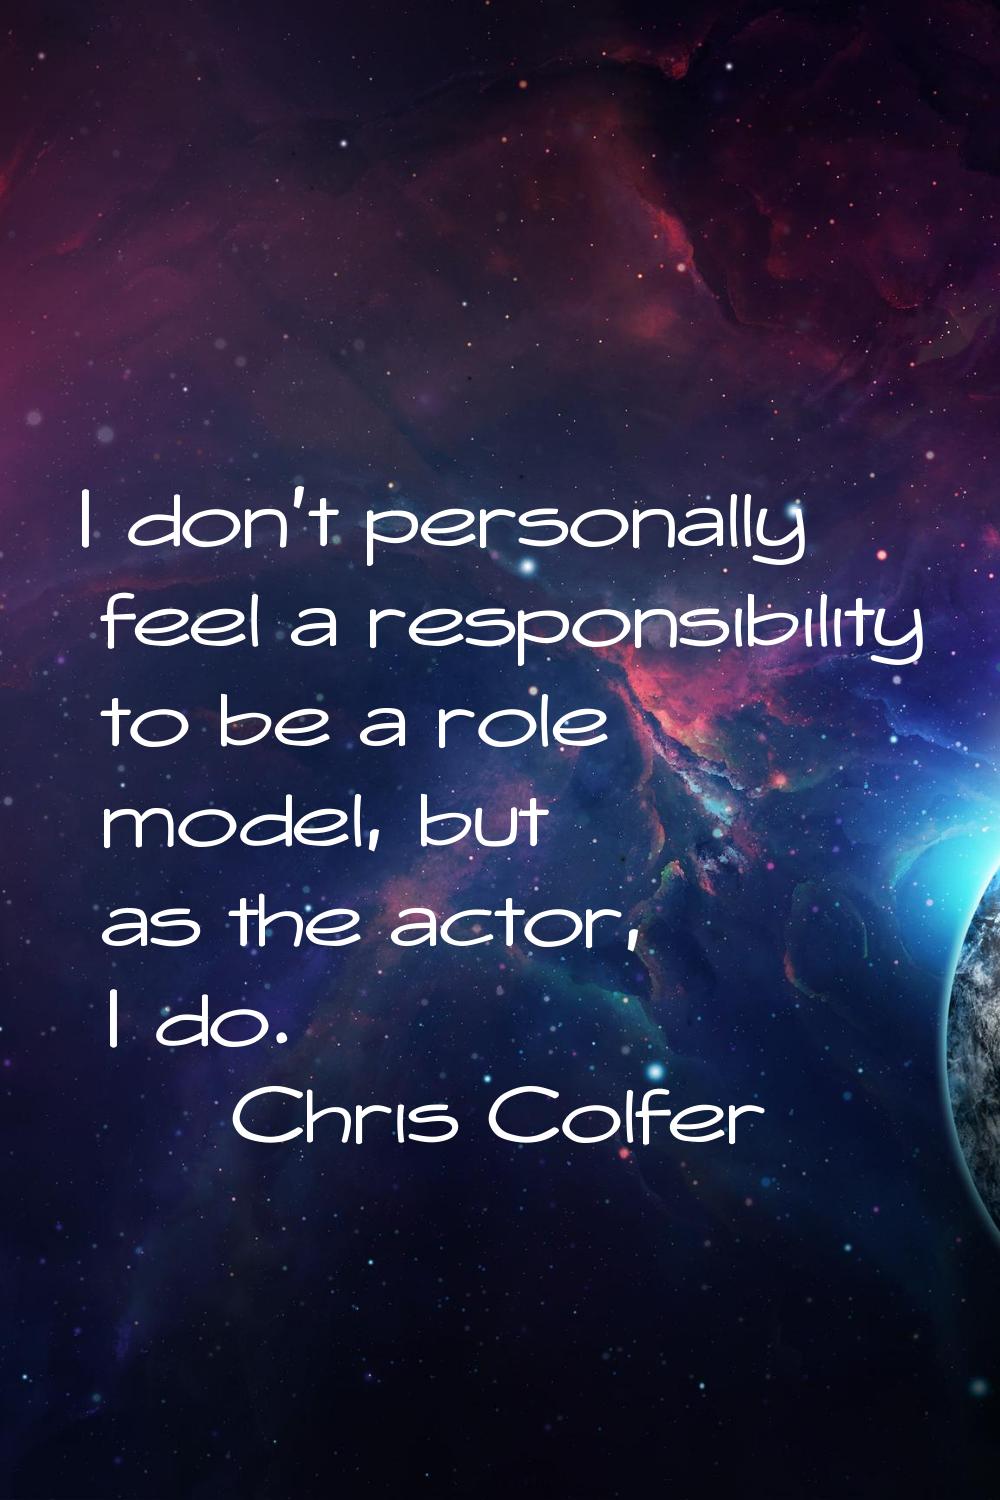 I don't personally feel a responsibility to be a role model, but as the actor, I do.